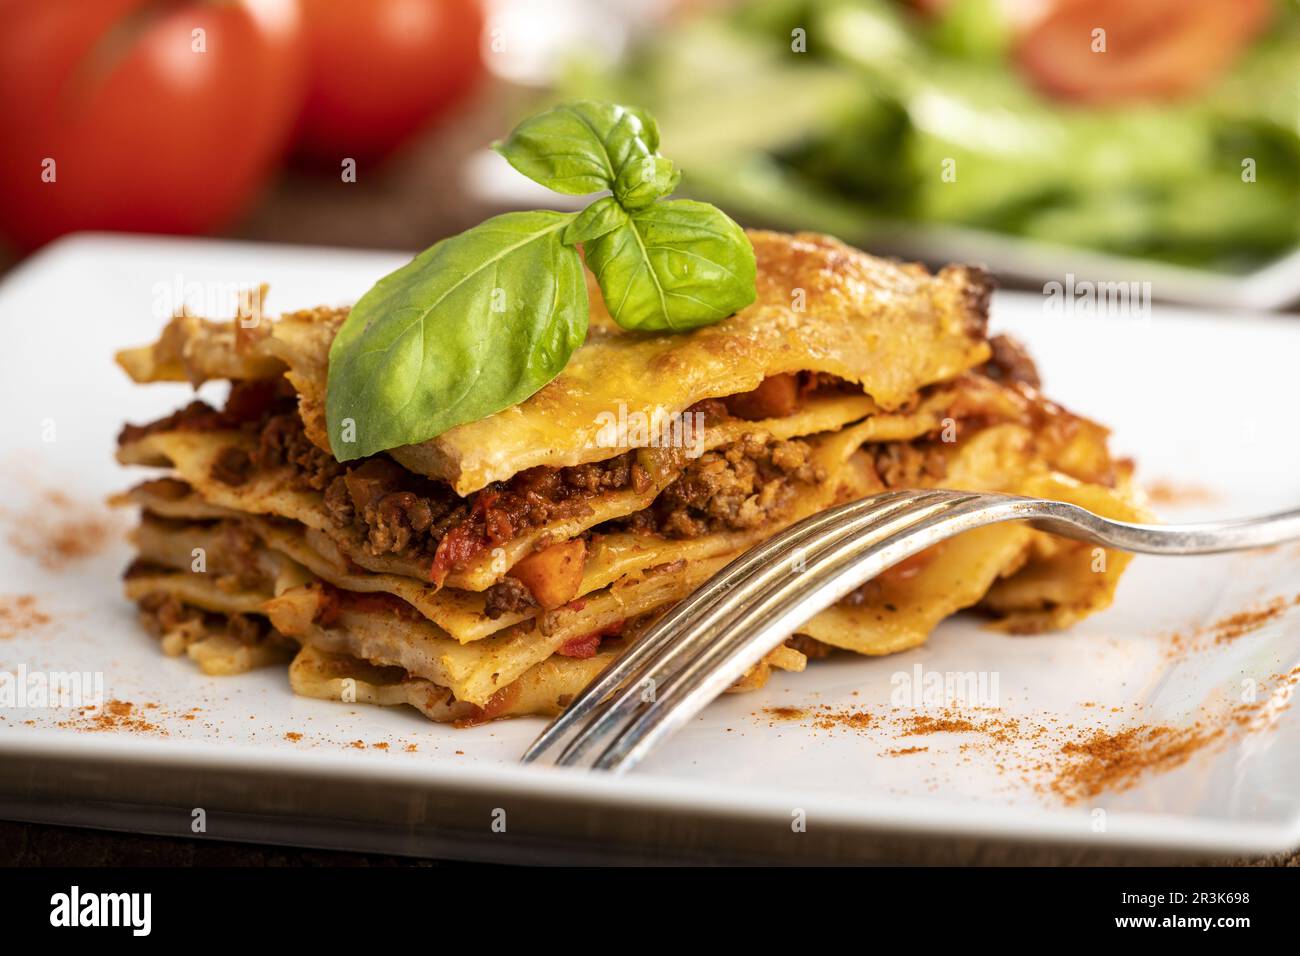 Lasagna on a plate with salad on wood Stock Photo